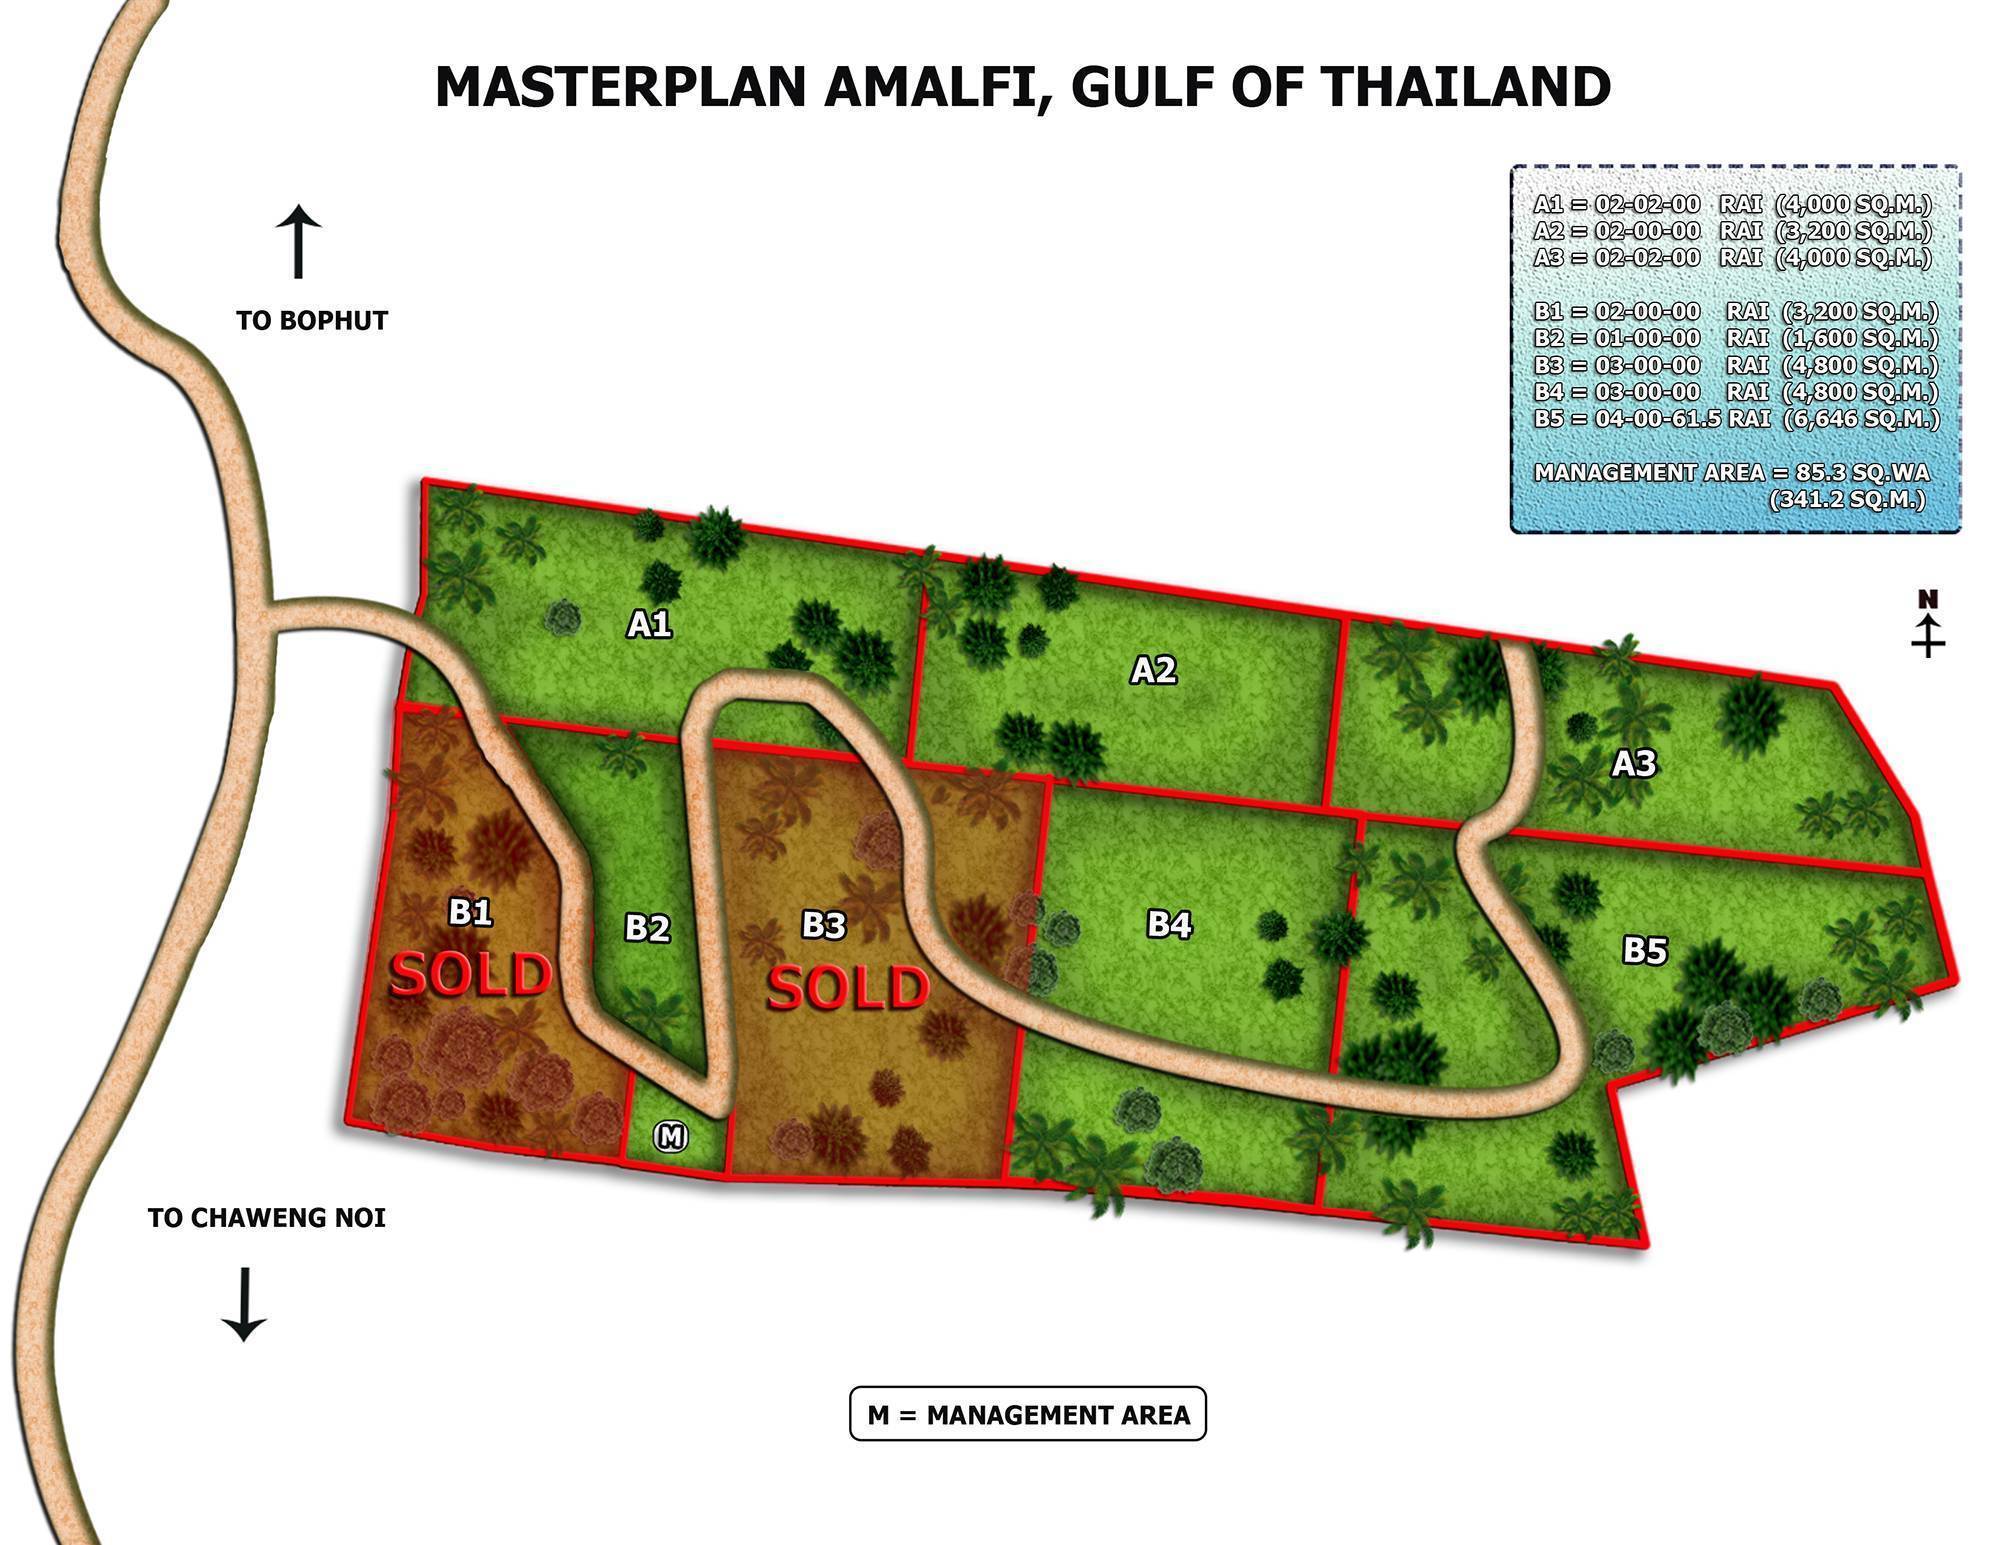 Exclusive hill top land plots for sale in Bophut, Amalfi project: Exclusive hill top land plots for sale in Bophut, Amalfi project  